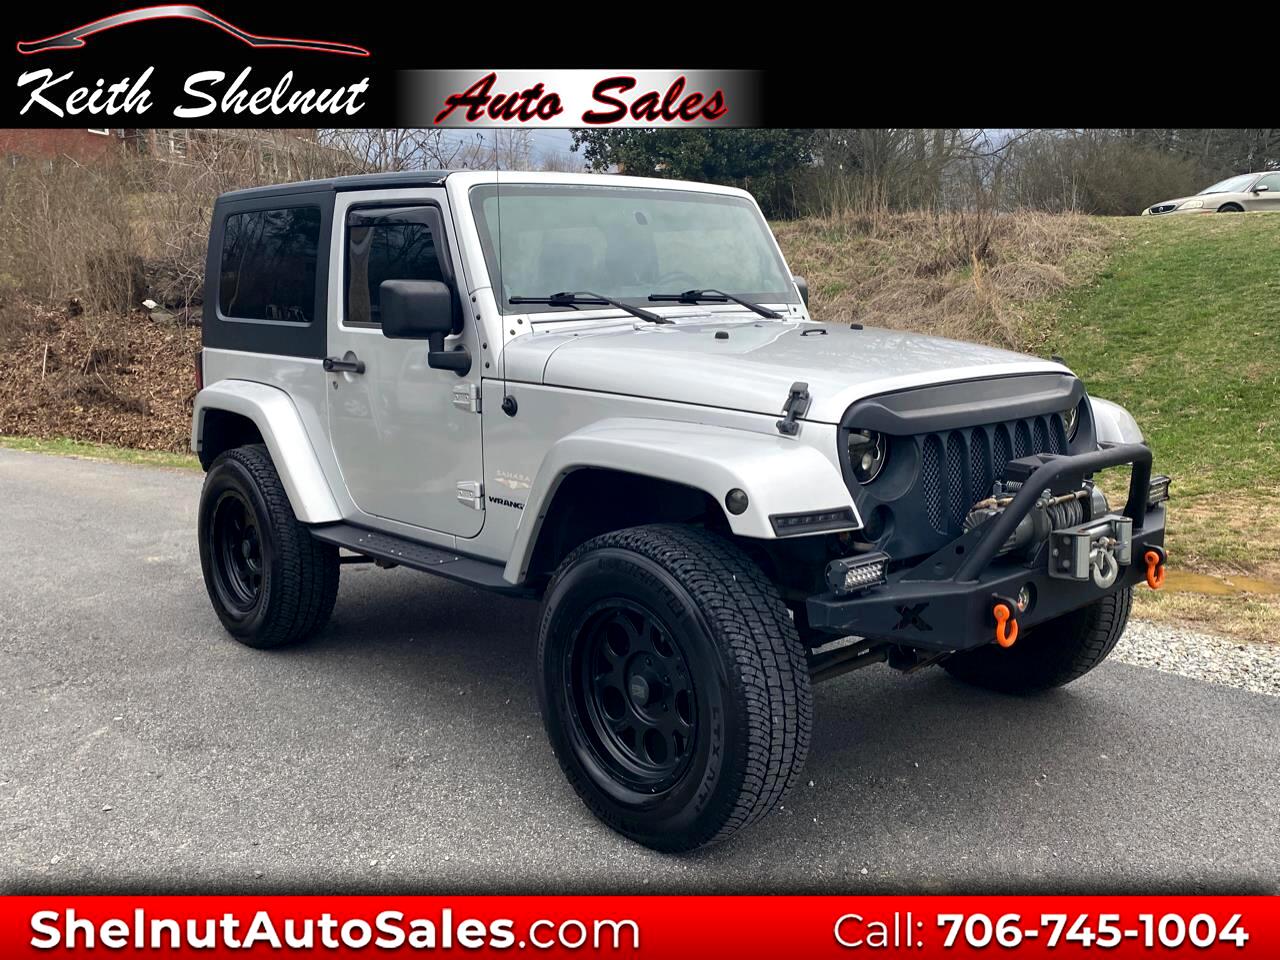 Used 2007 Jeep Wrangler 4WD 2dr Sahara for Sale in Blairsville GA 30512  Keith Shelnut Auto Sales